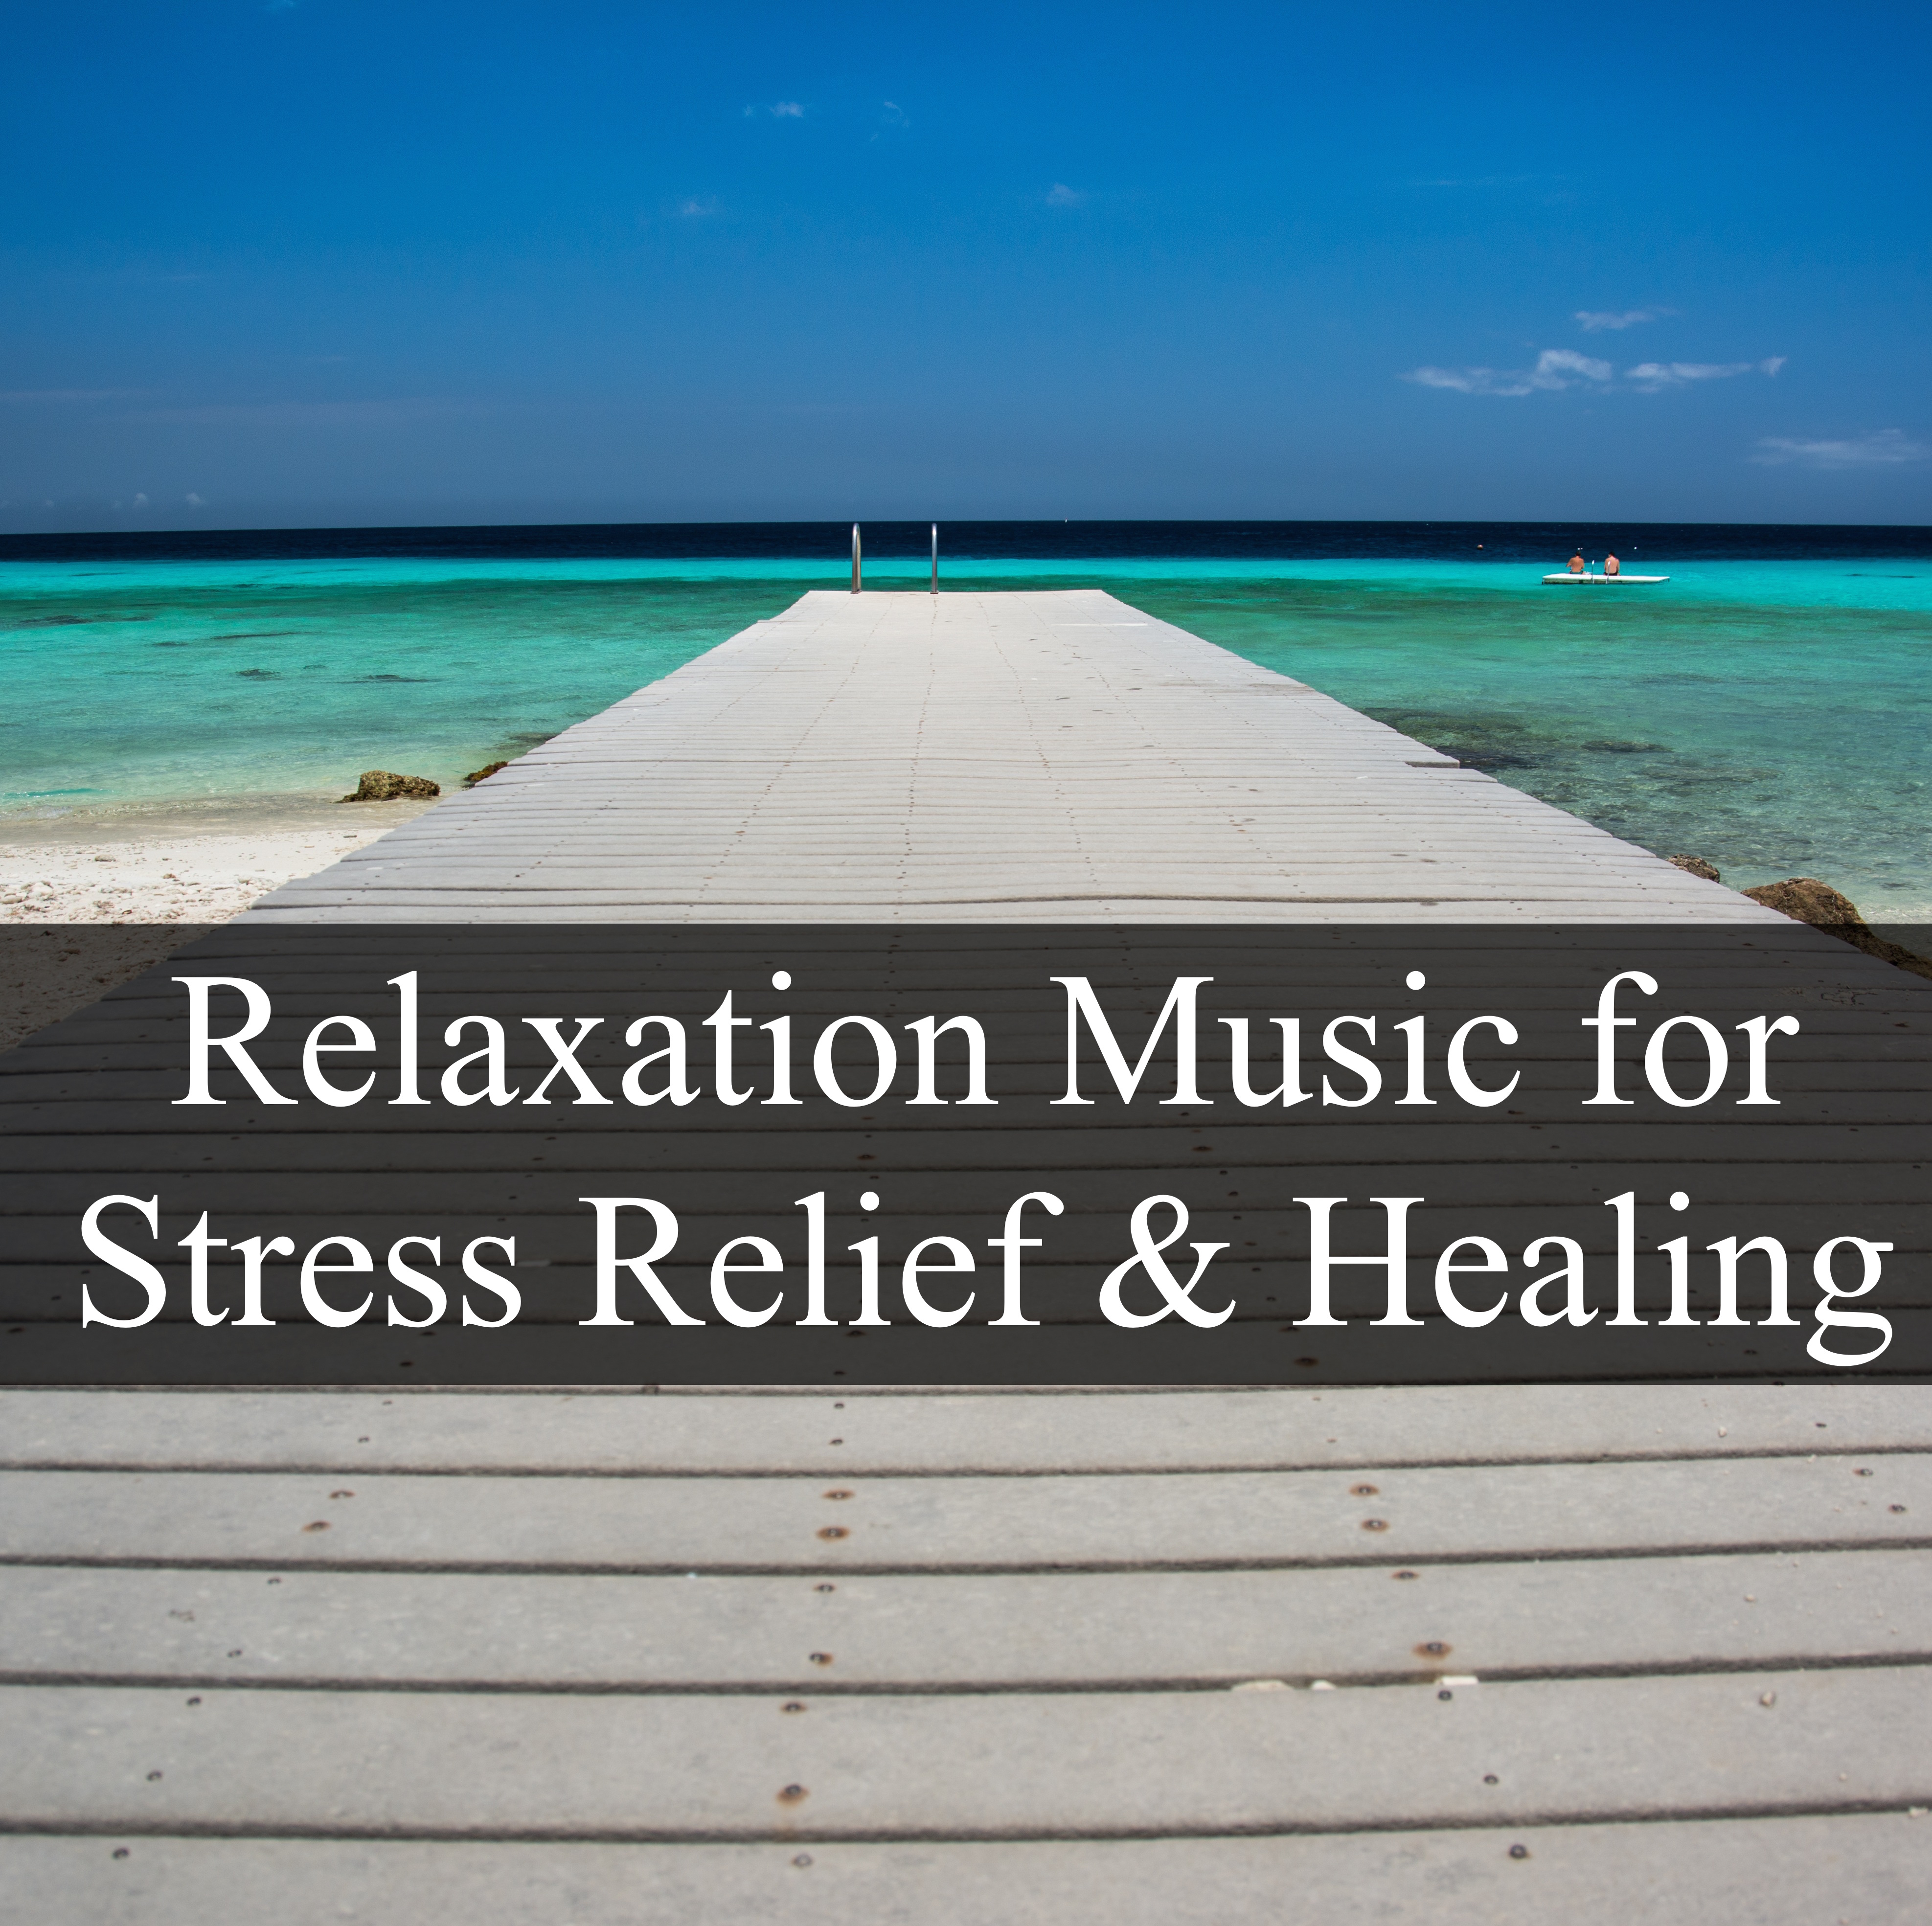 Relaxation Music for Stress Relief and Healing - Soothing Sounds for Better Mental Health, Deep Focus, Pefect Sleep, Concentration and Study